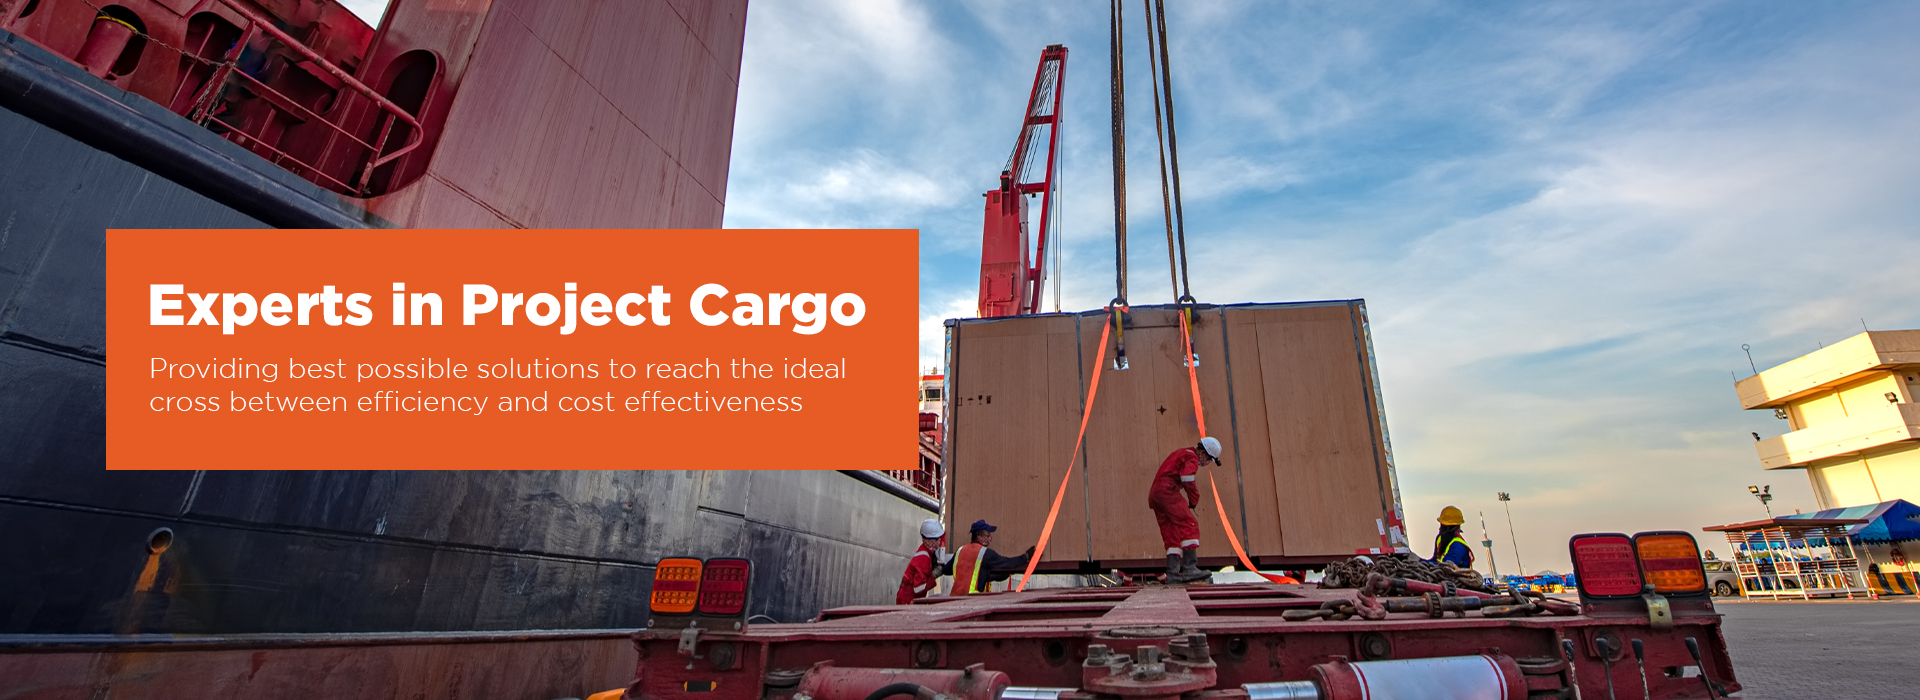 Experts in Project Cargo